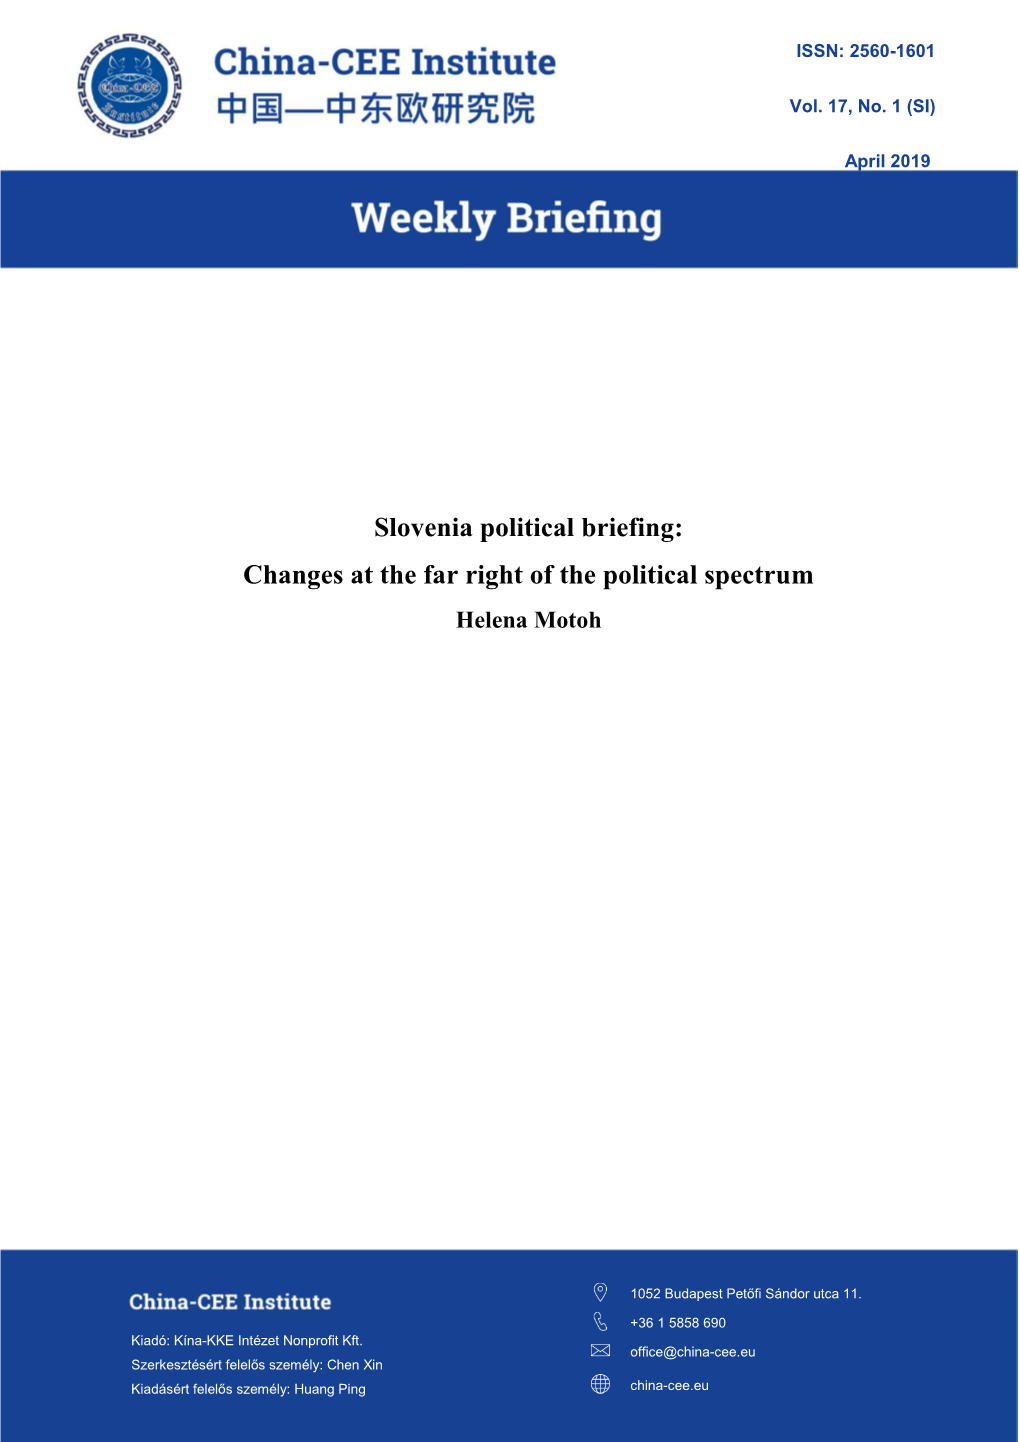 Slovenia Political Briefing: Changes at the Far Right of the Political Spectrum Helena Motoh